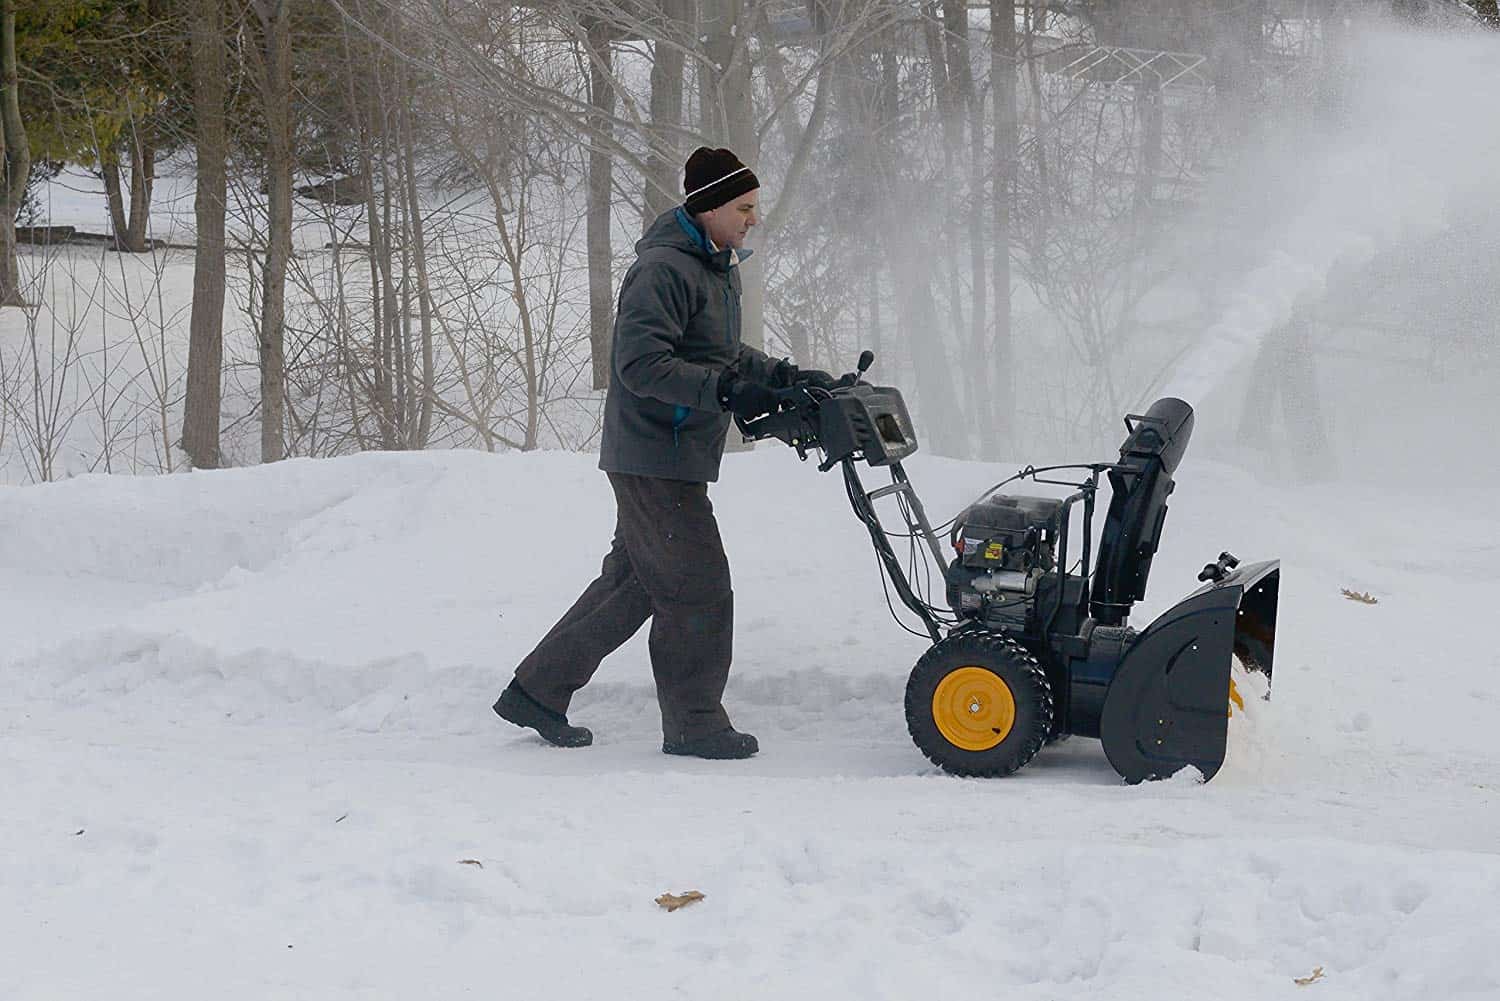 2 Stage Snow Blower Reviews